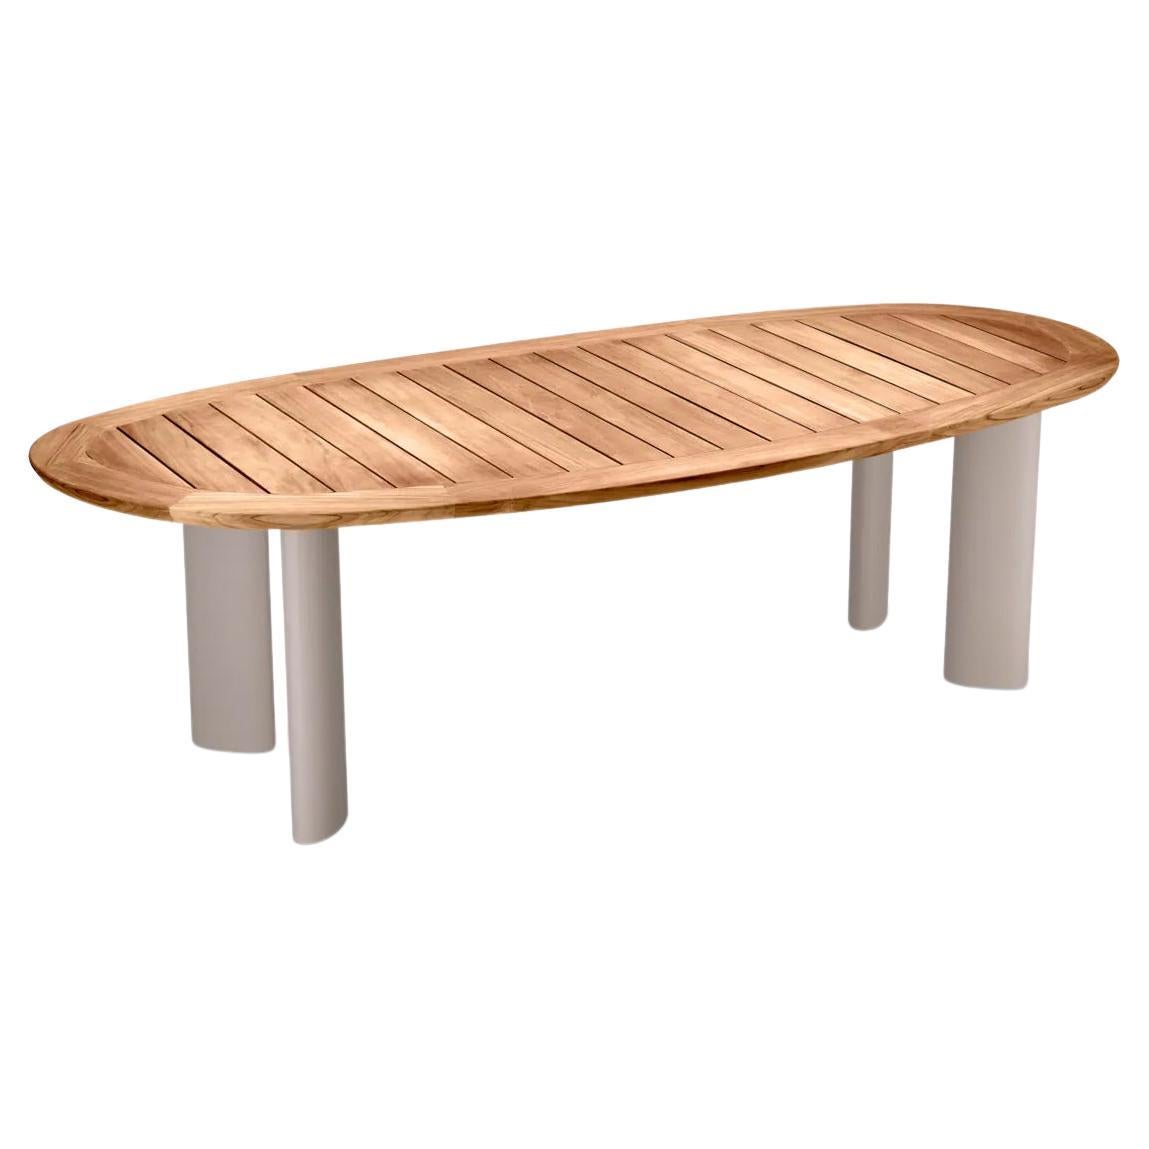 Teeko Outdoor Dining Table For Sale